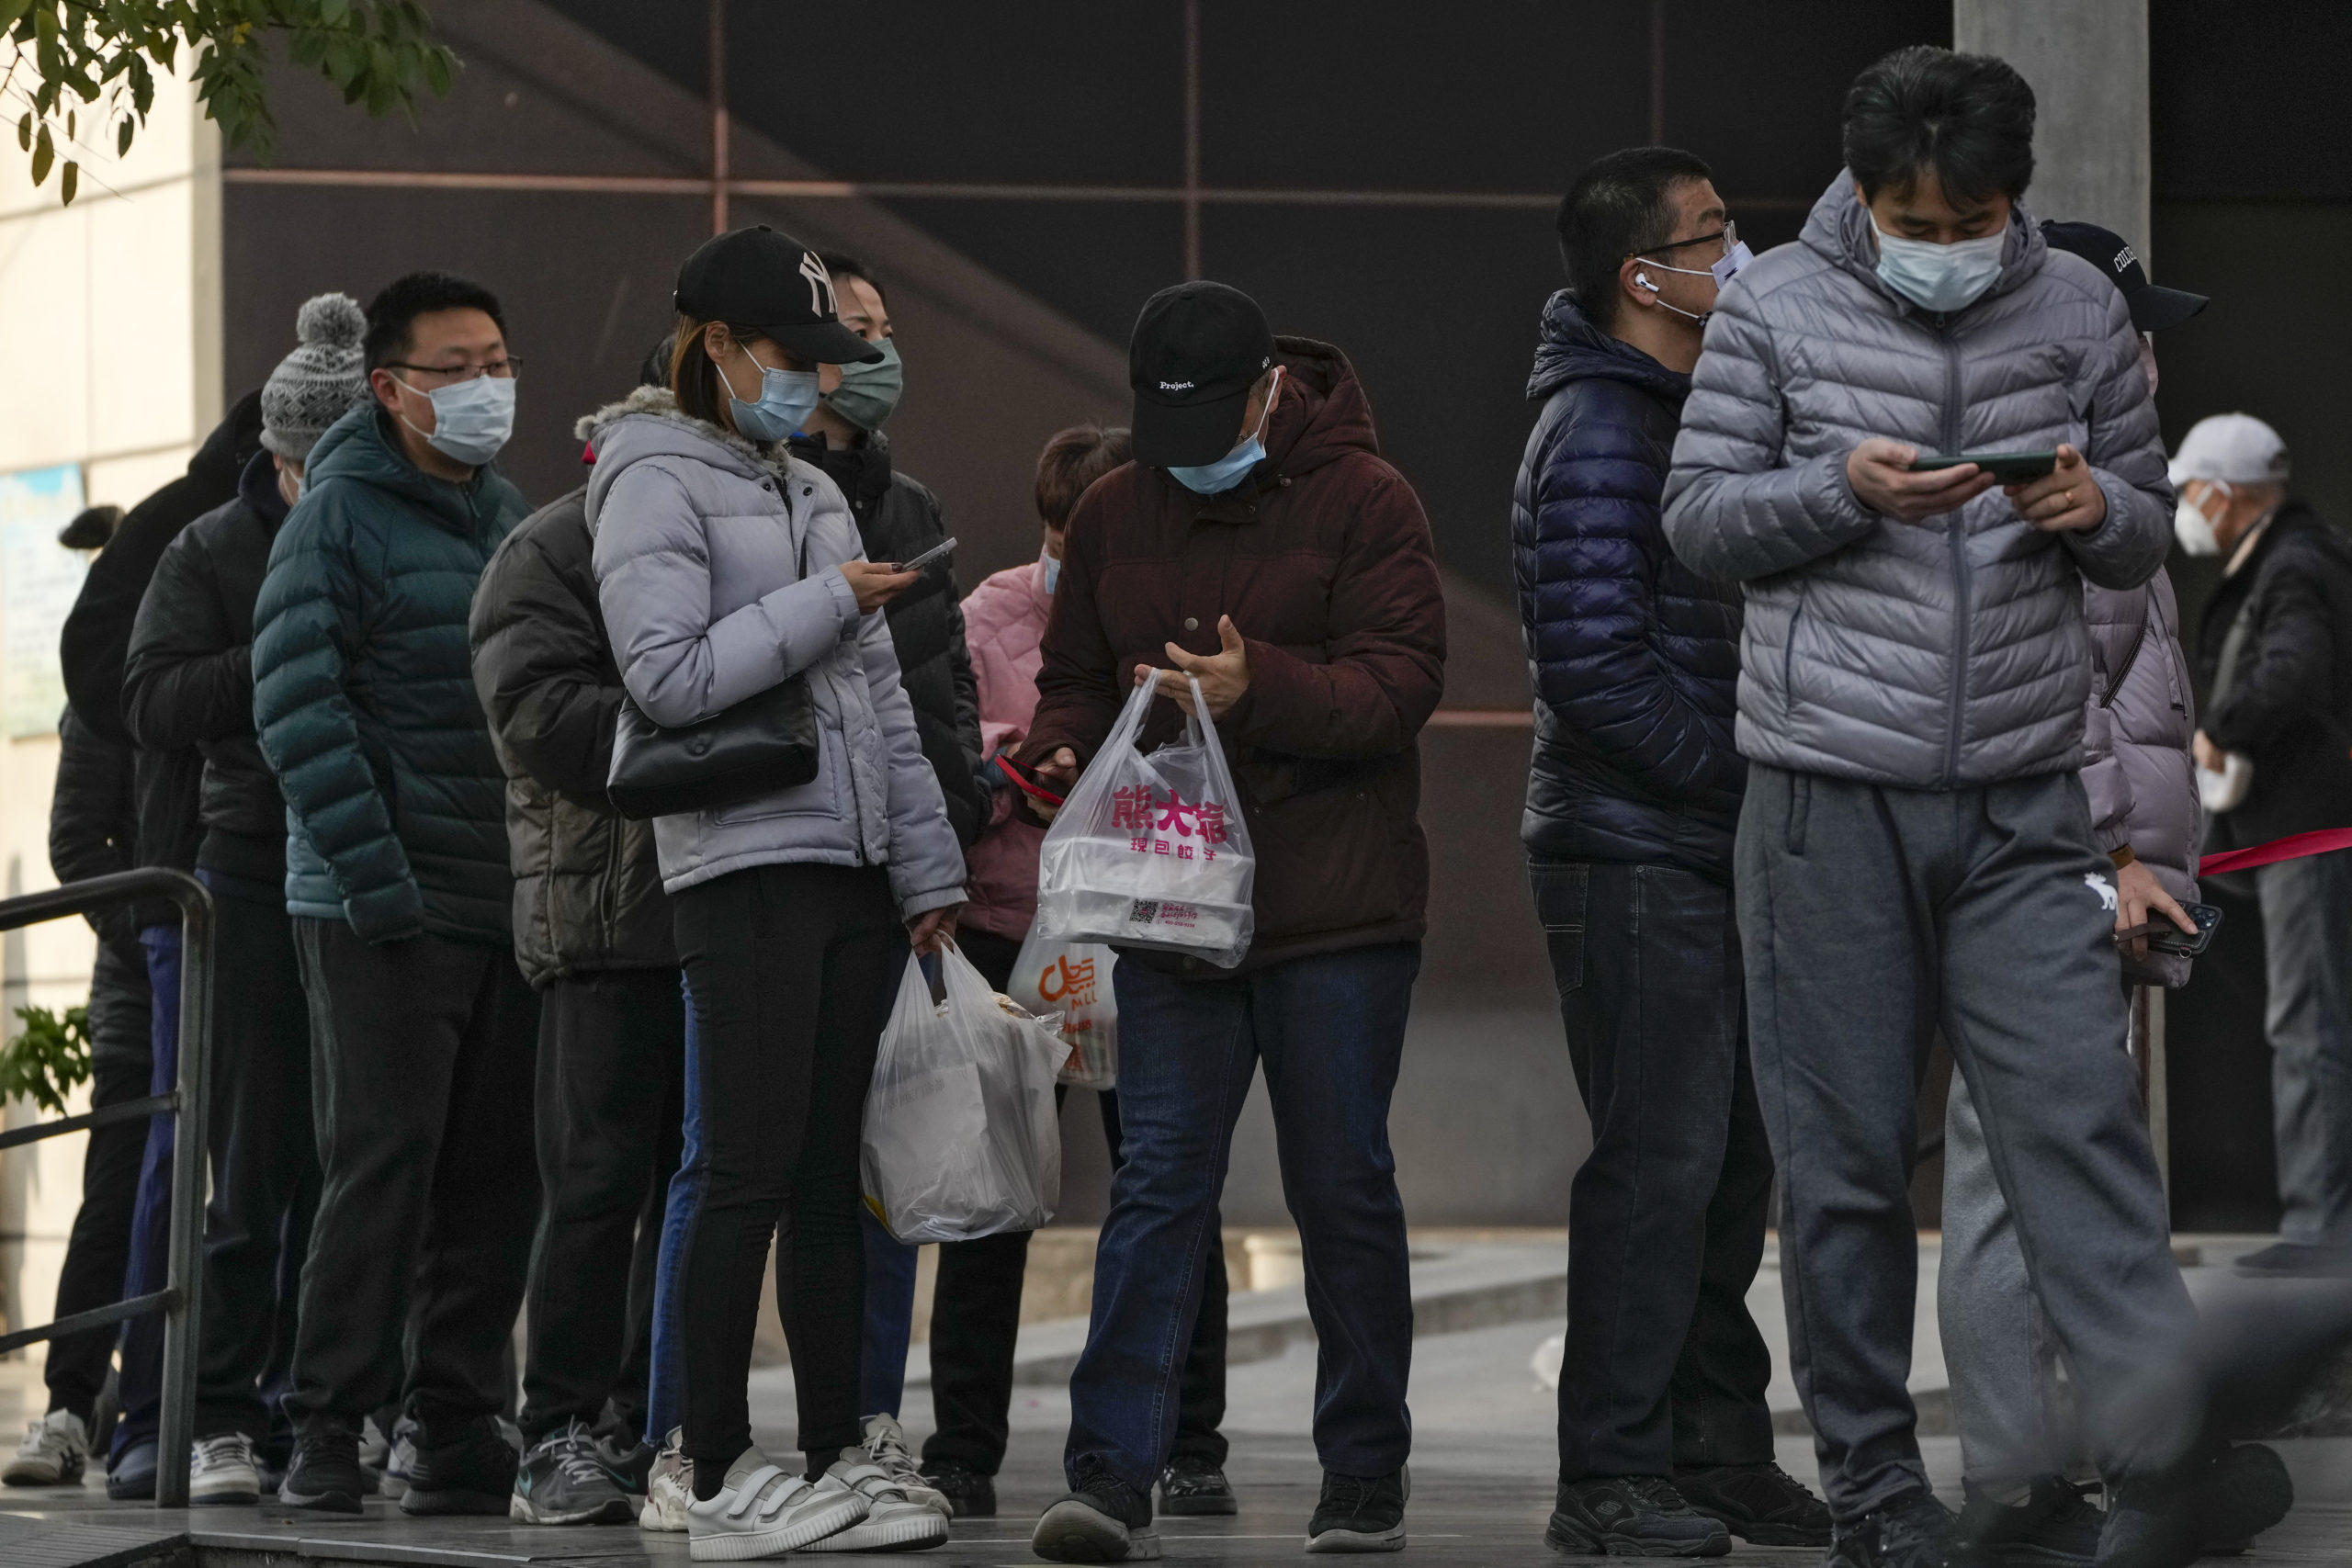 Beijing residents wait in line to enter a store on Sunday.